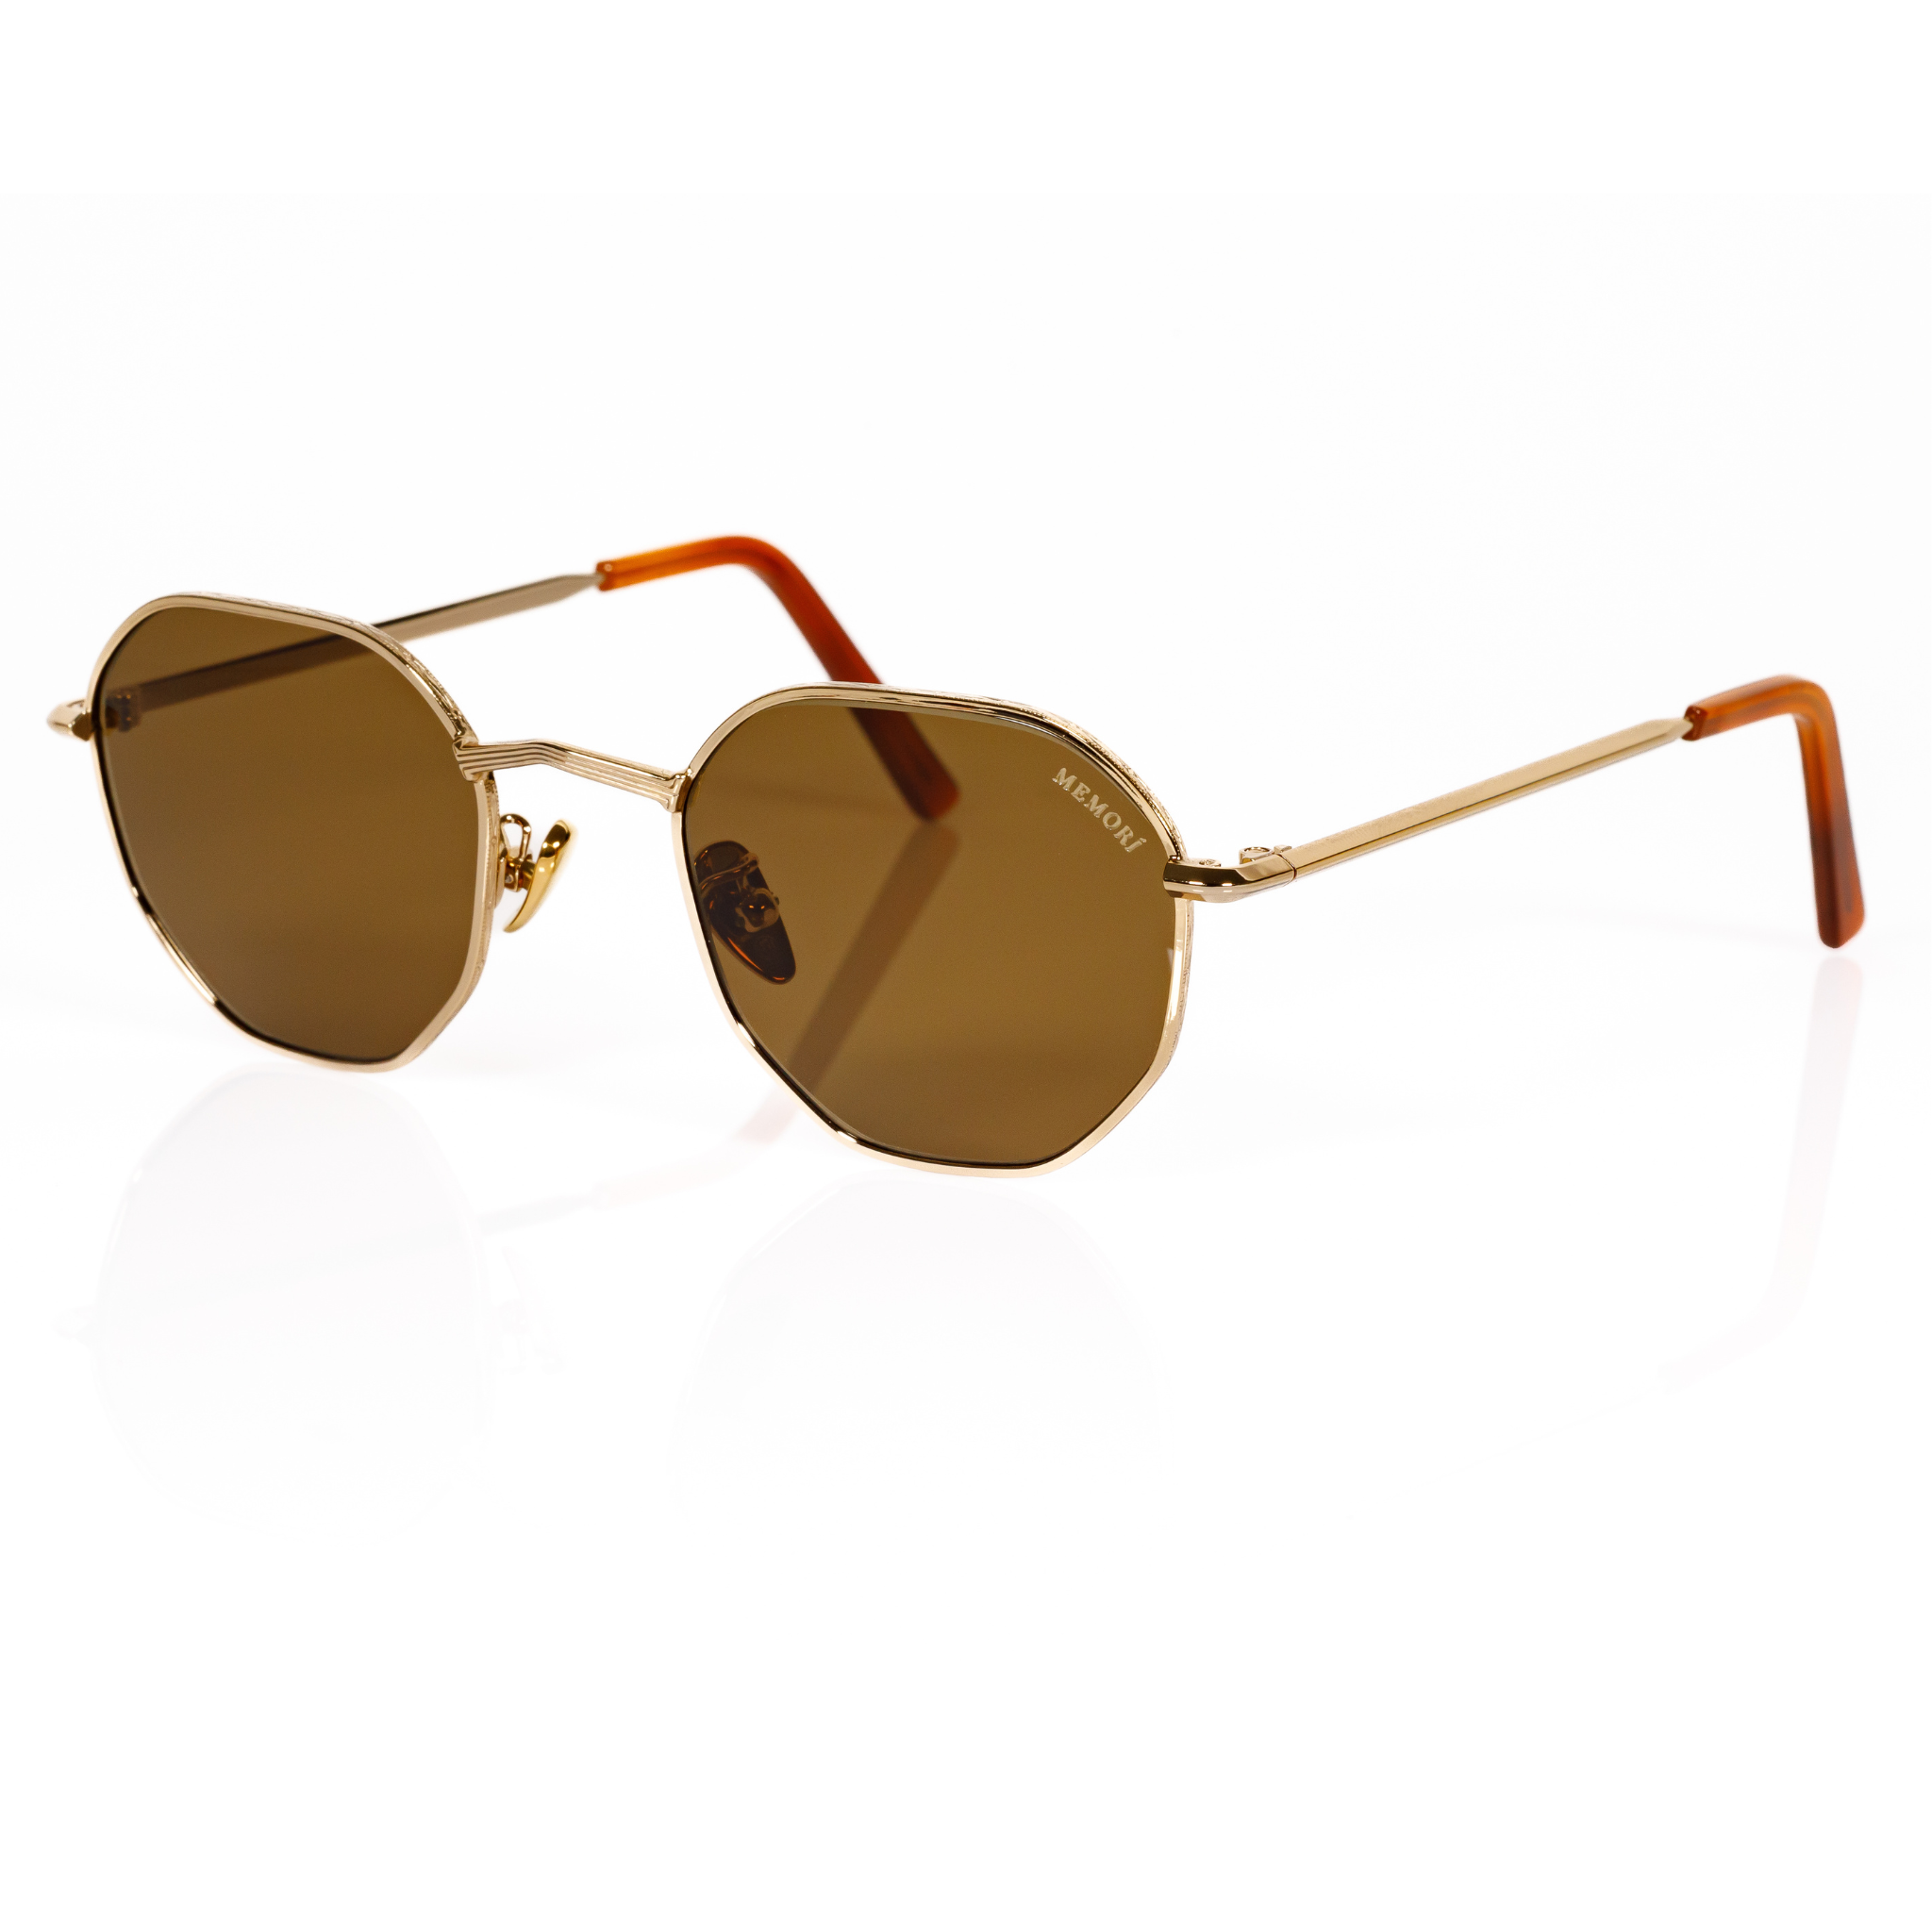 best sunglasses for small faces gold metal men women side profile view showcases stamped geometric rims and tortoise shell pattern cellulose acetate temple tips